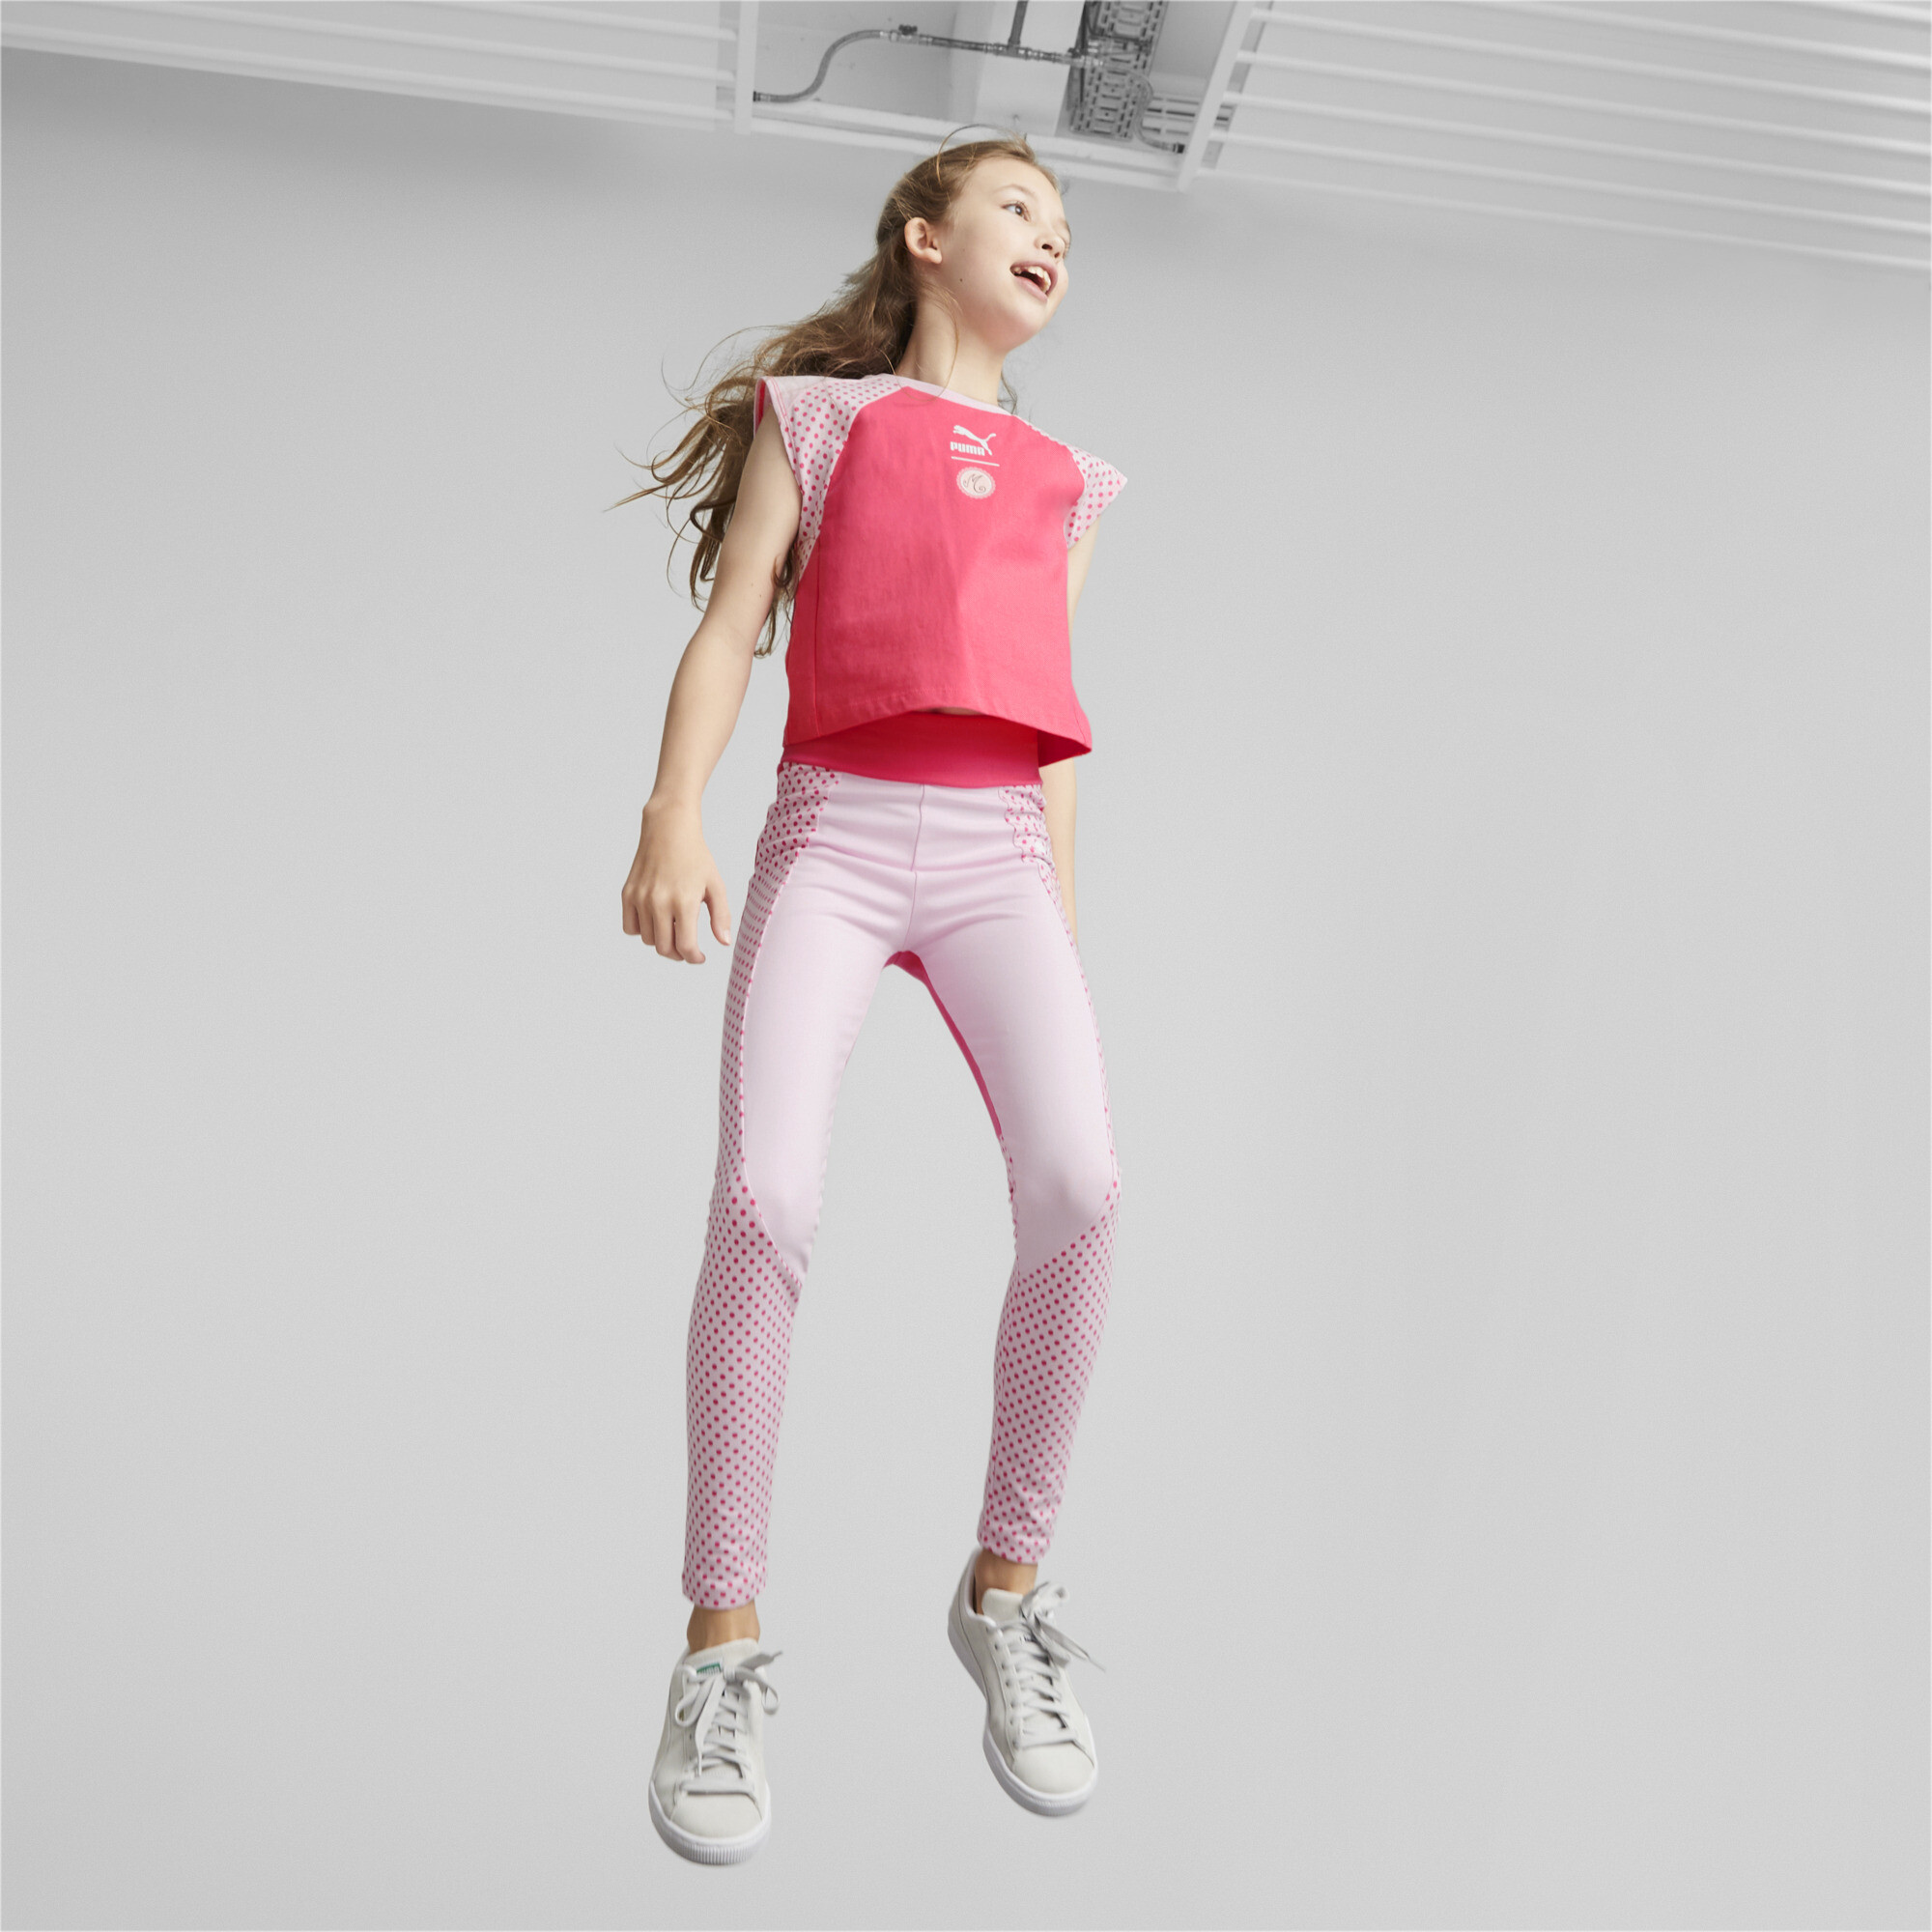 PUMA X MIRACULOUS Leggings In Pink, Size 13-14 Youth